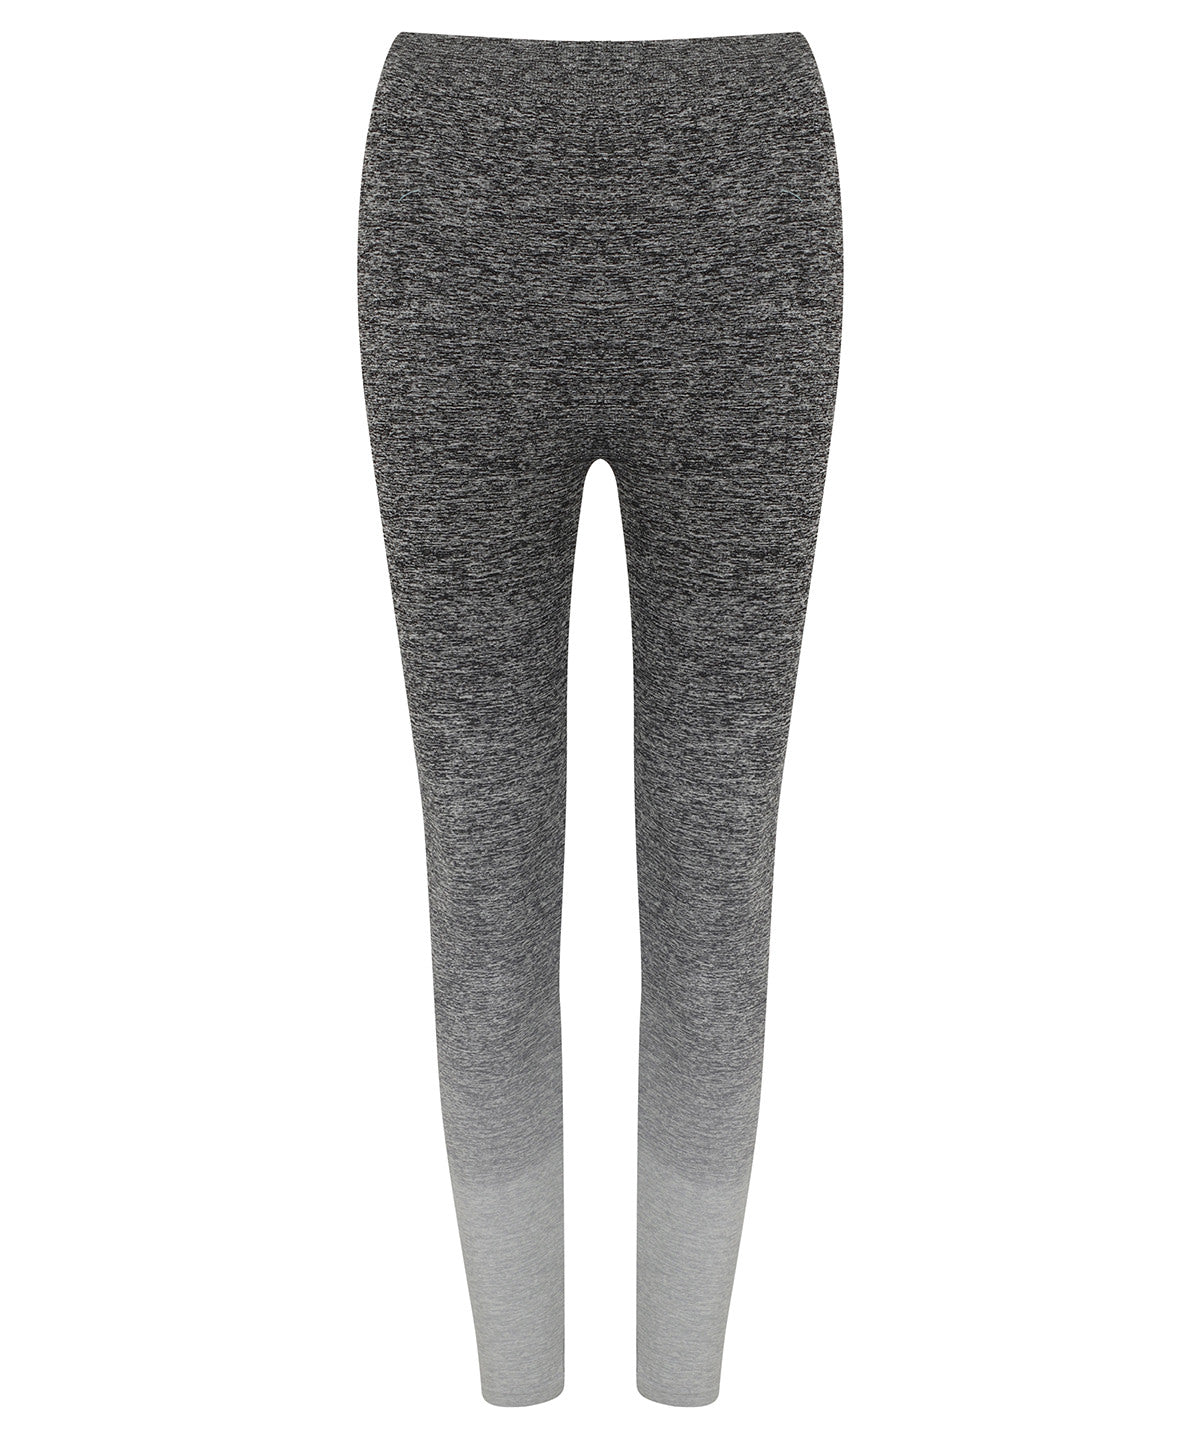 Tombo TL300 Tombo Ladies Seamless Fade Out Leggings - COOZO